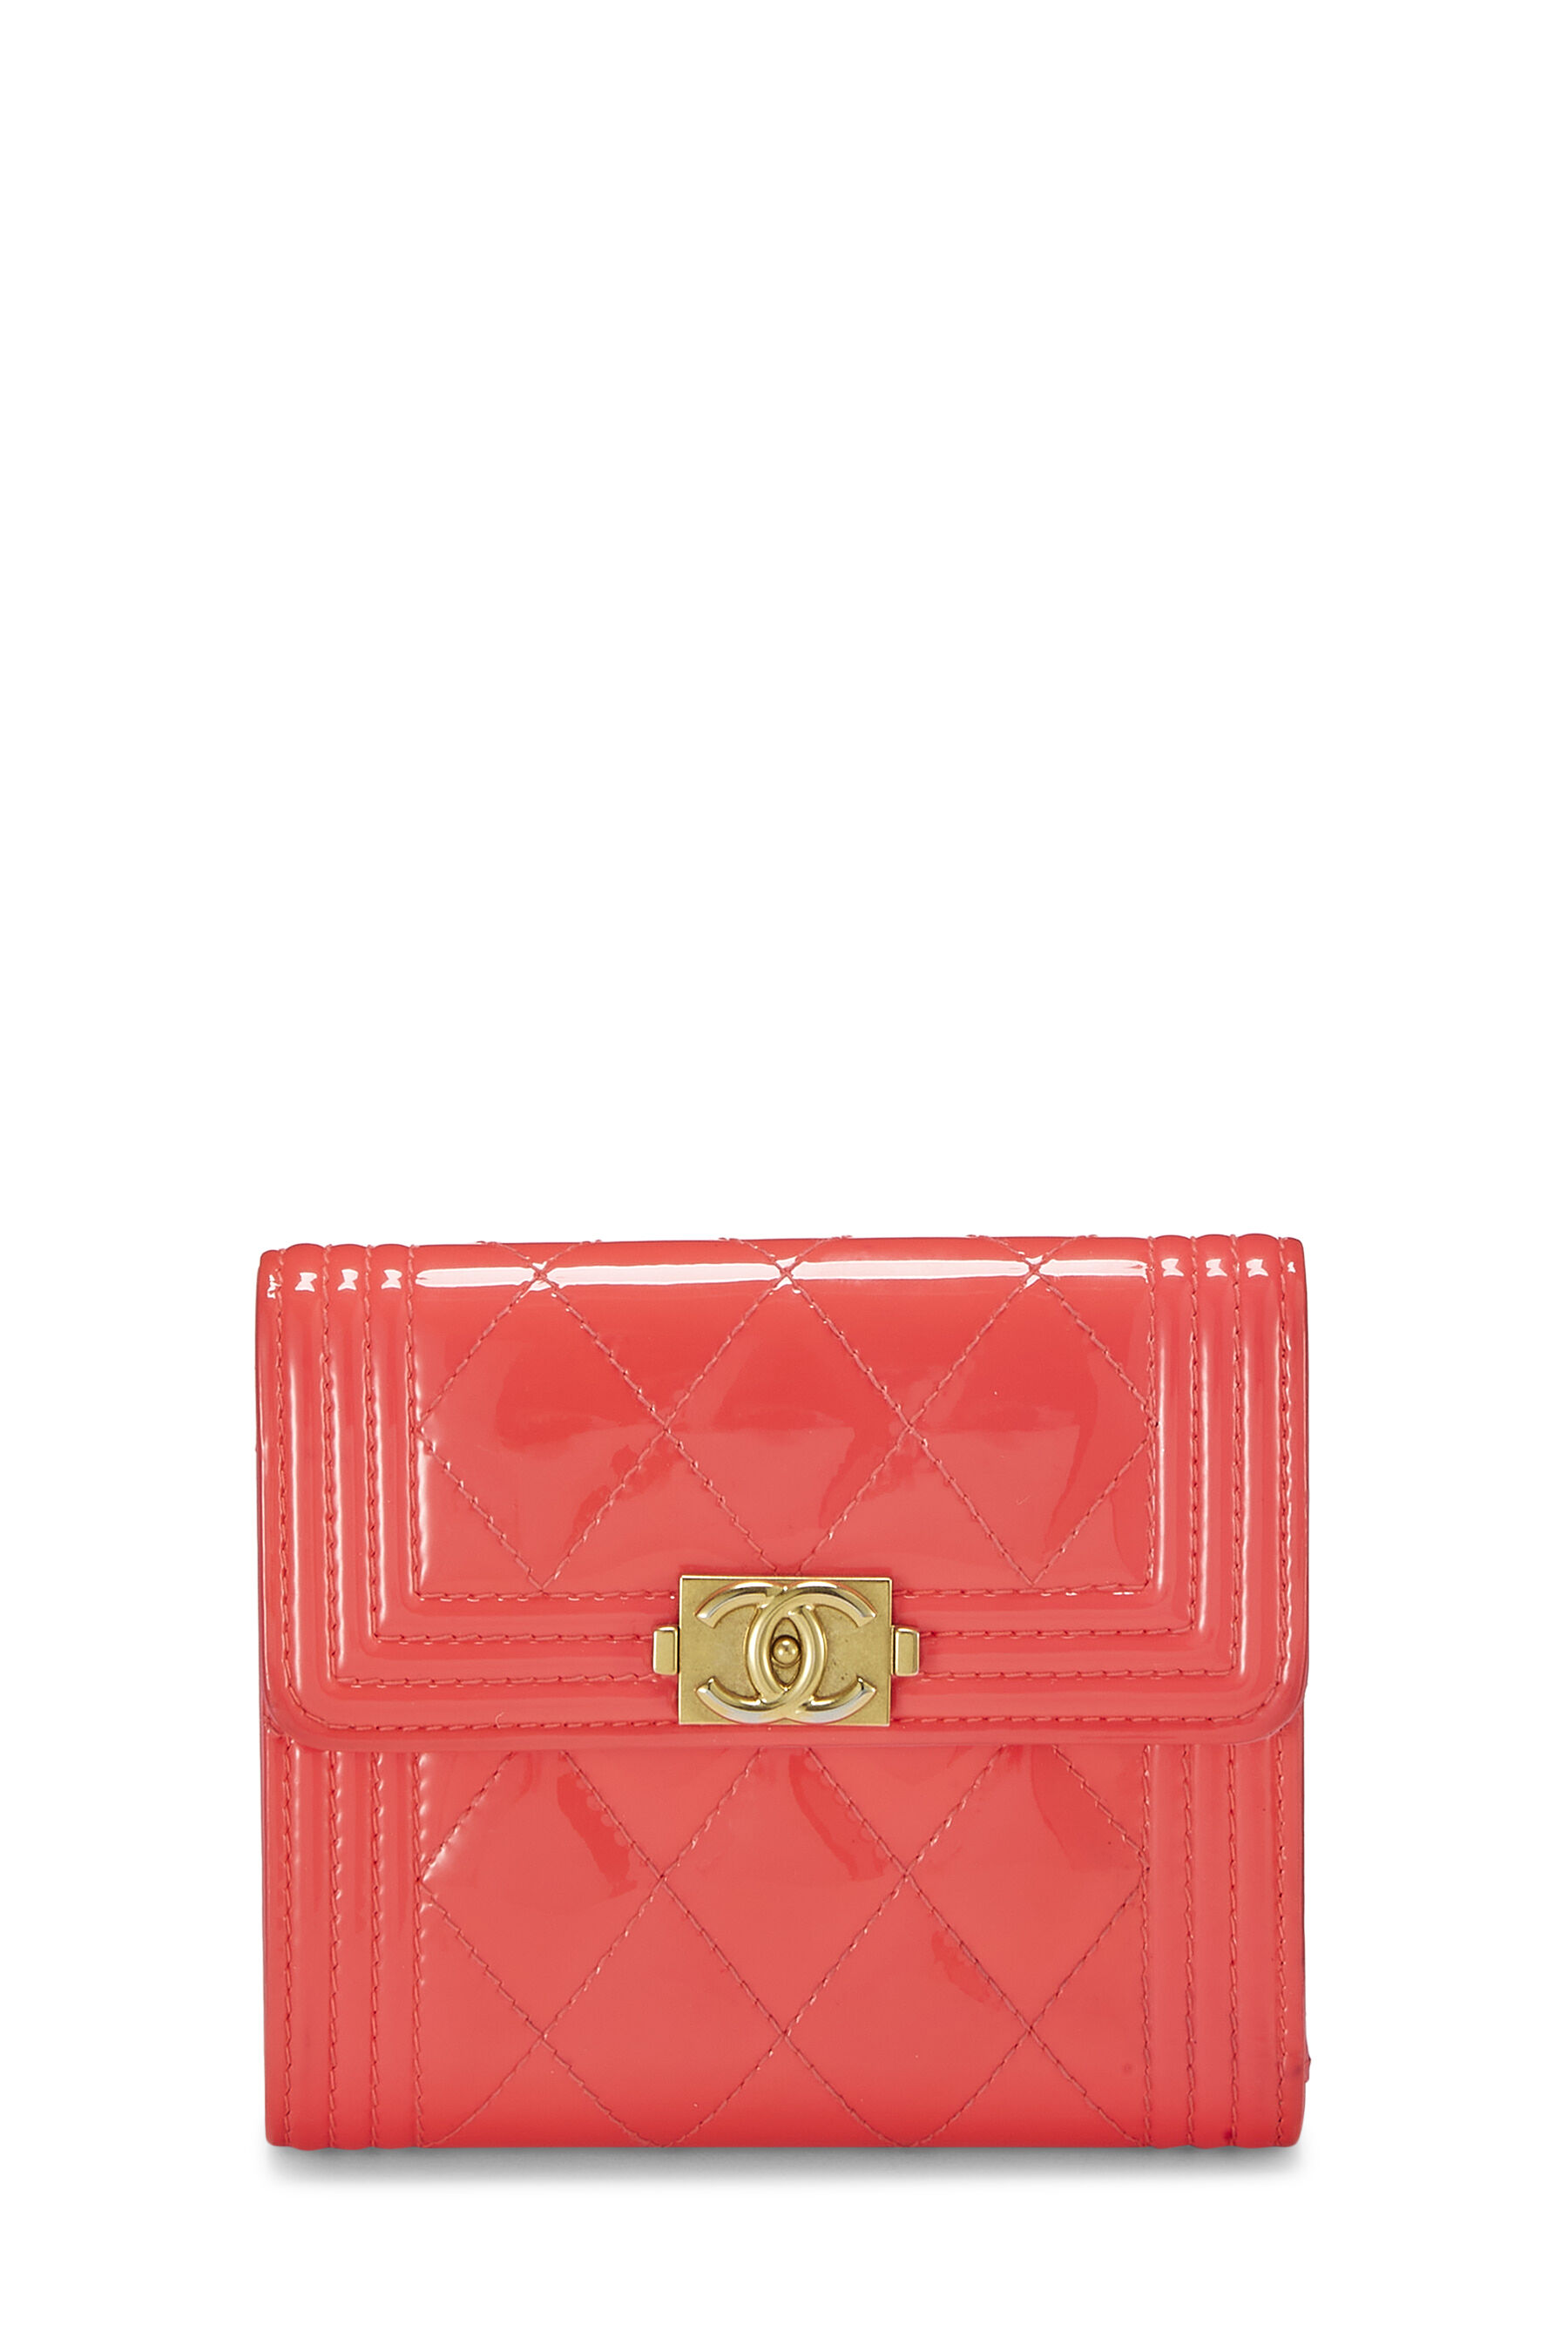 Chanel - Pink Quilted Patent Leather Boy Wallet